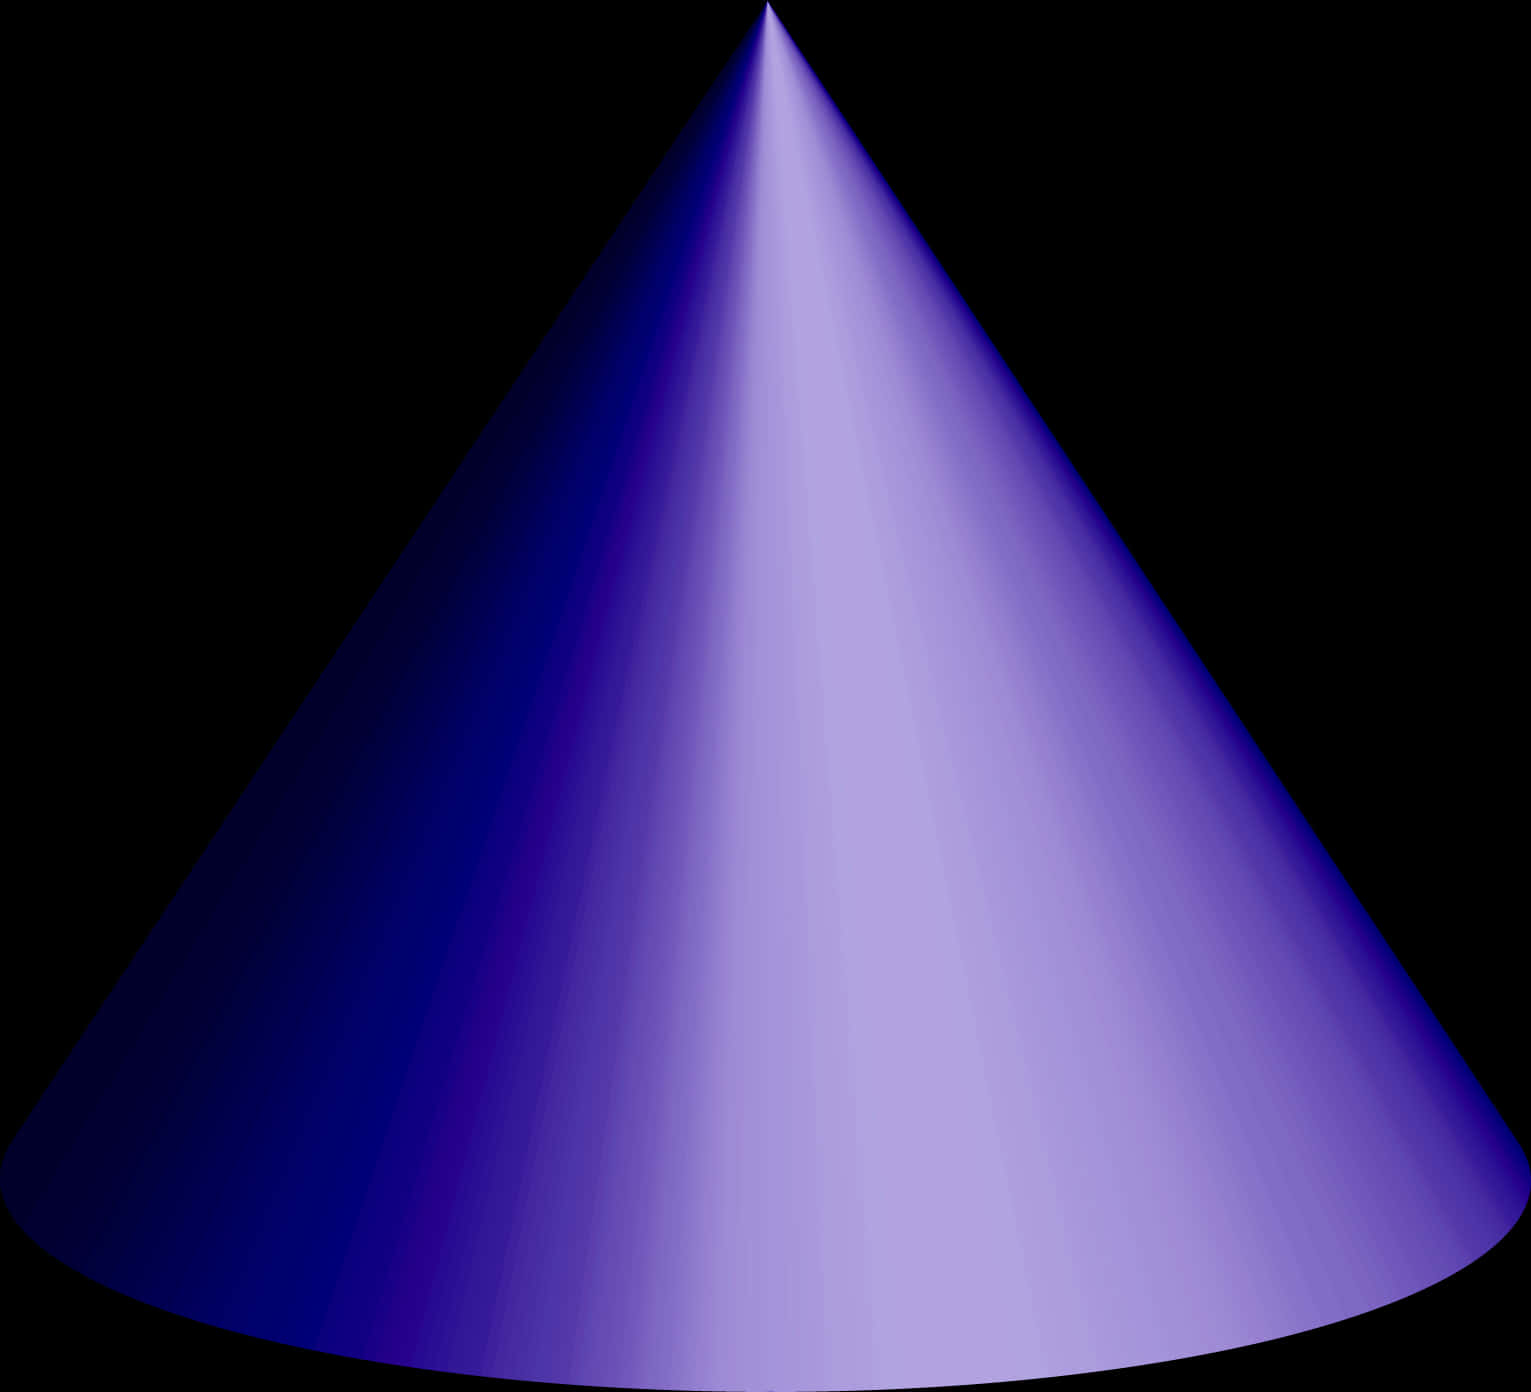 A Blue Cone Shaped Object